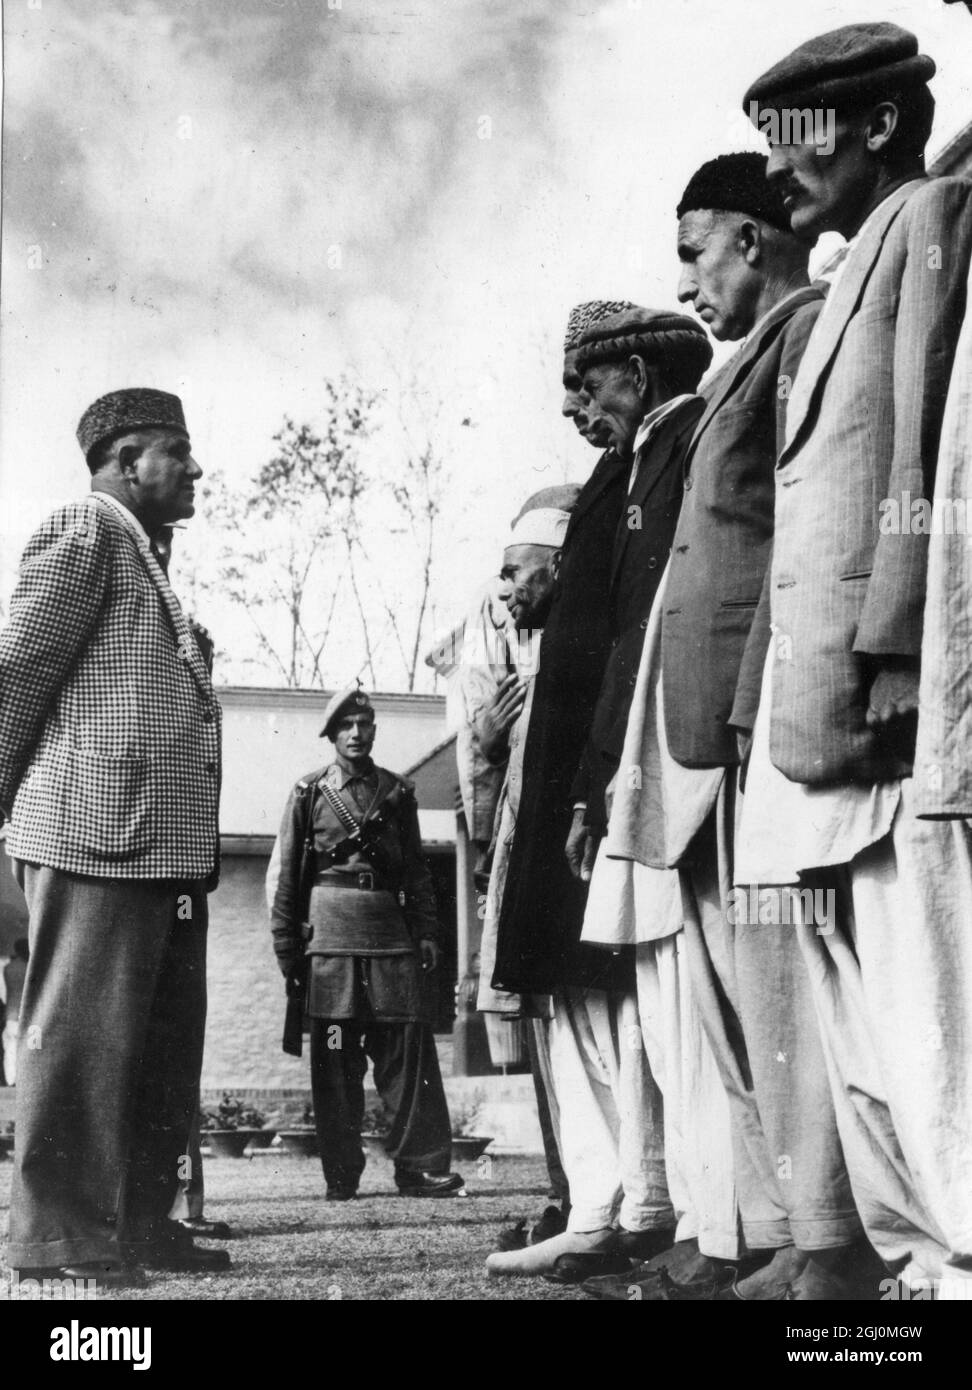 Life in a remote area of Northern Pakistan - where important Archaeological finds have been made . The Wali Sahib present Ruler of Swat in western style sports coat and traditional lamb's wool Pakistani cap interviews some of his subjects in front of Government Offices in capital City of Saidu Shariff . 1958 Stock Photo